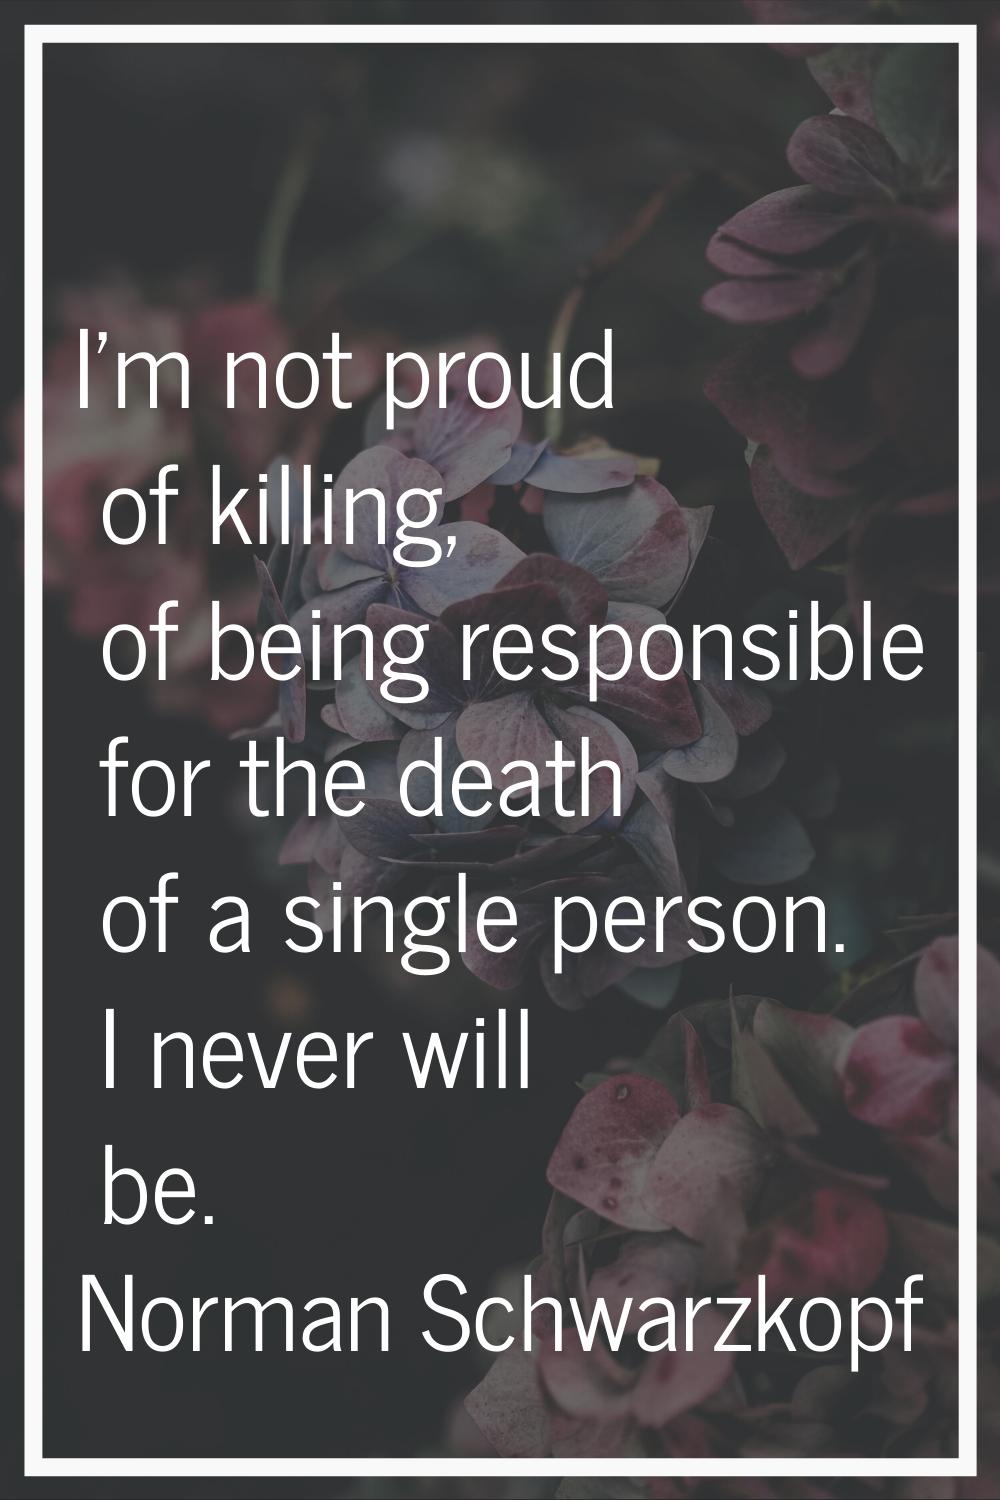 I'm not proud of killing, of being responsible for the death of a single person. I never will be.